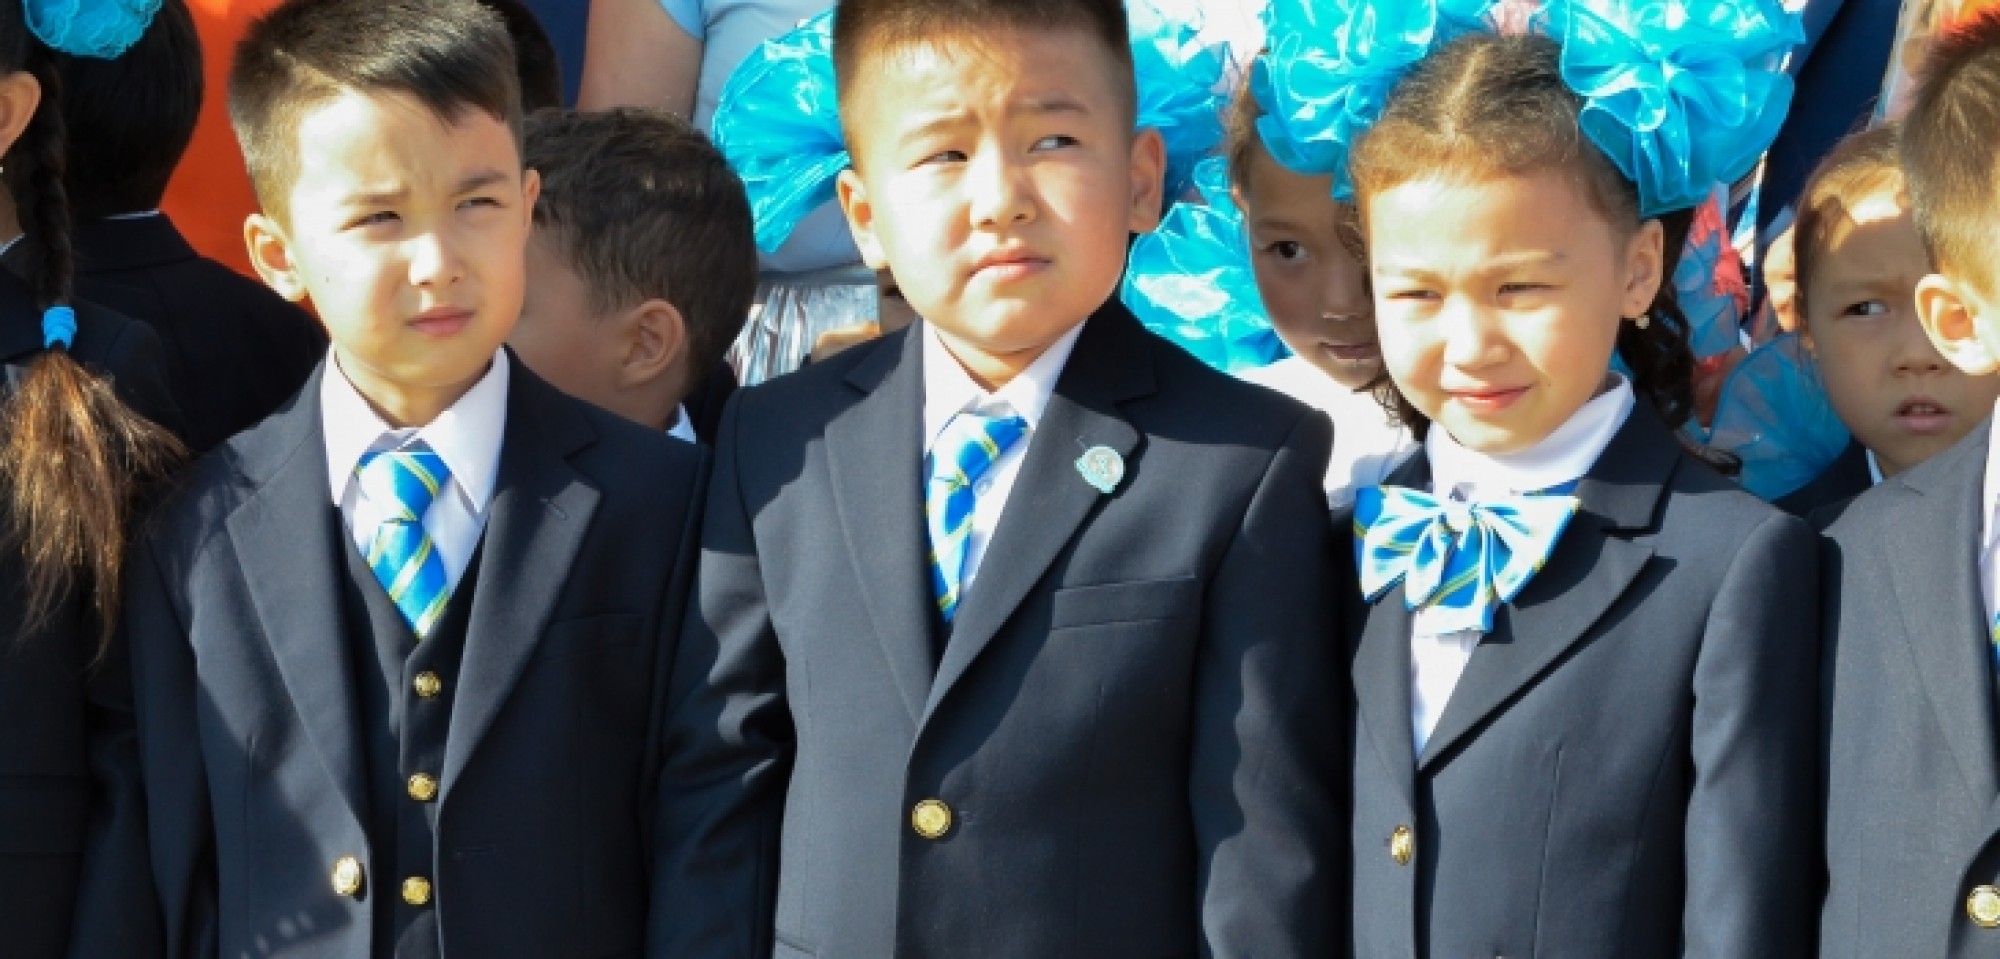 Five new schools are coming to Astana